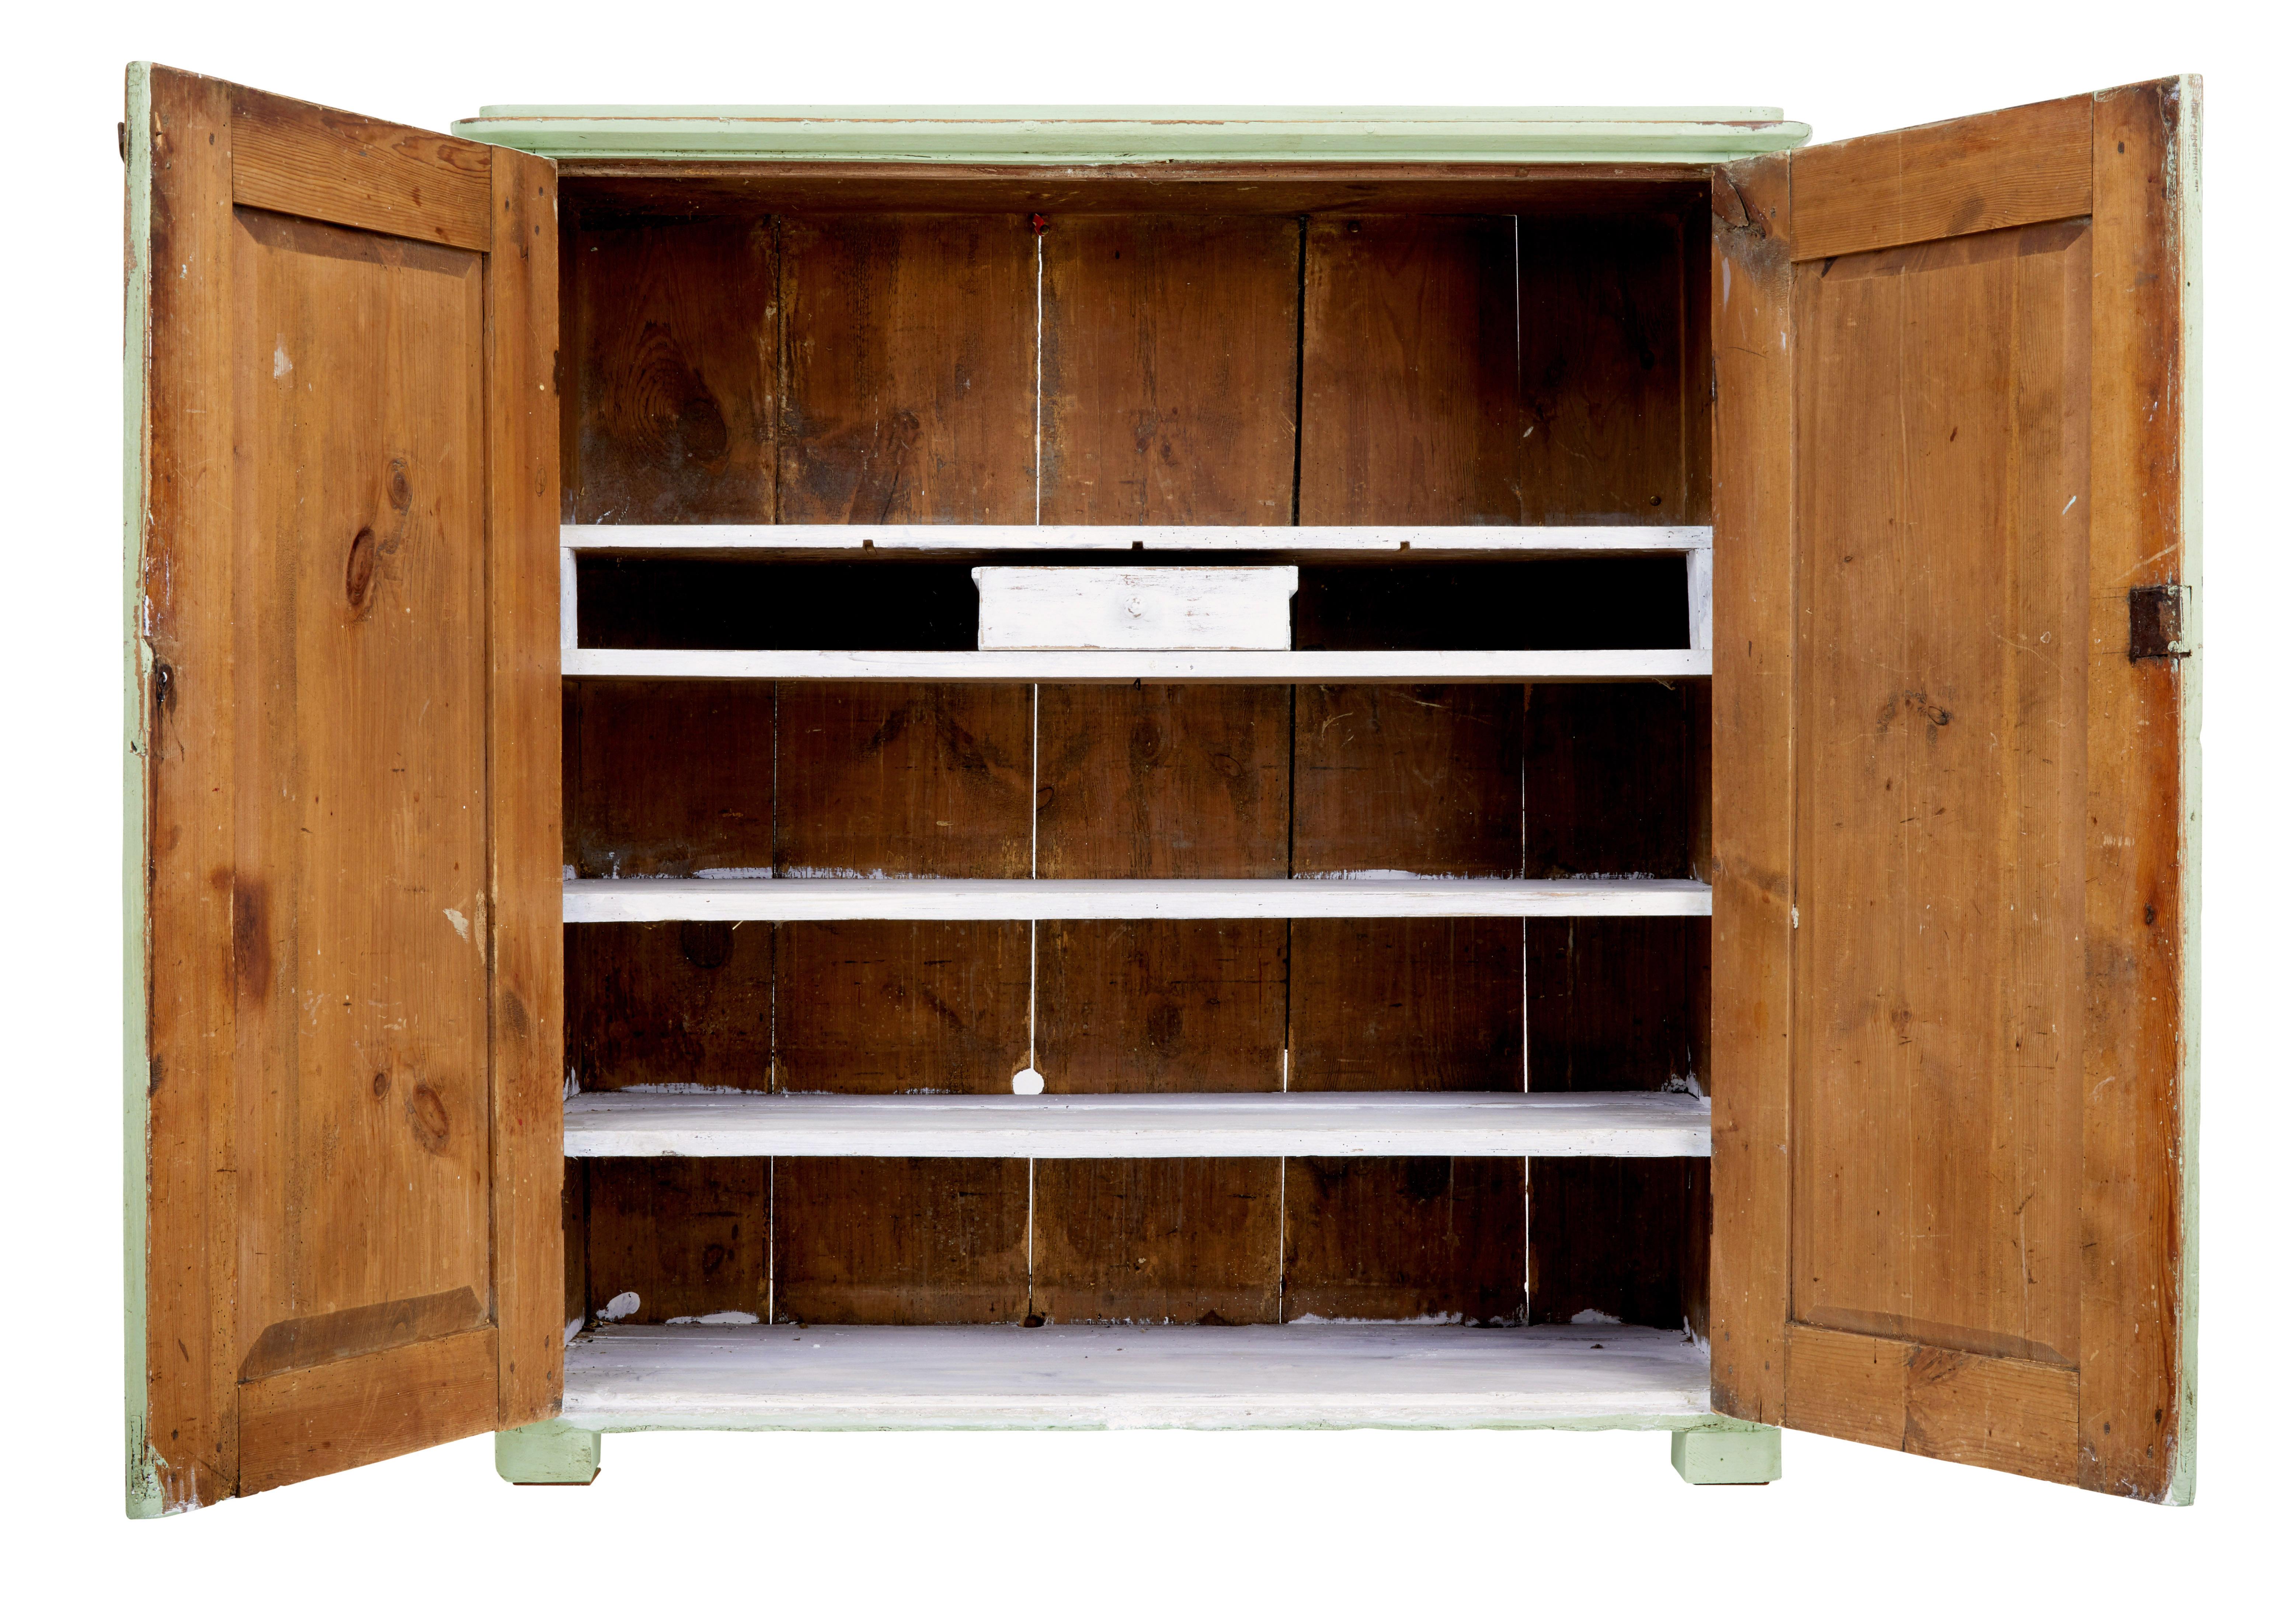 Rustic Swedish kitchen cupboard circa 1850.

Traditional pine double door cupboard which opens to 4 shelves which have been painted white.  There is also a loose fitting drawer.

Ideal for use in multiple rooms around the home, such as the kitchen